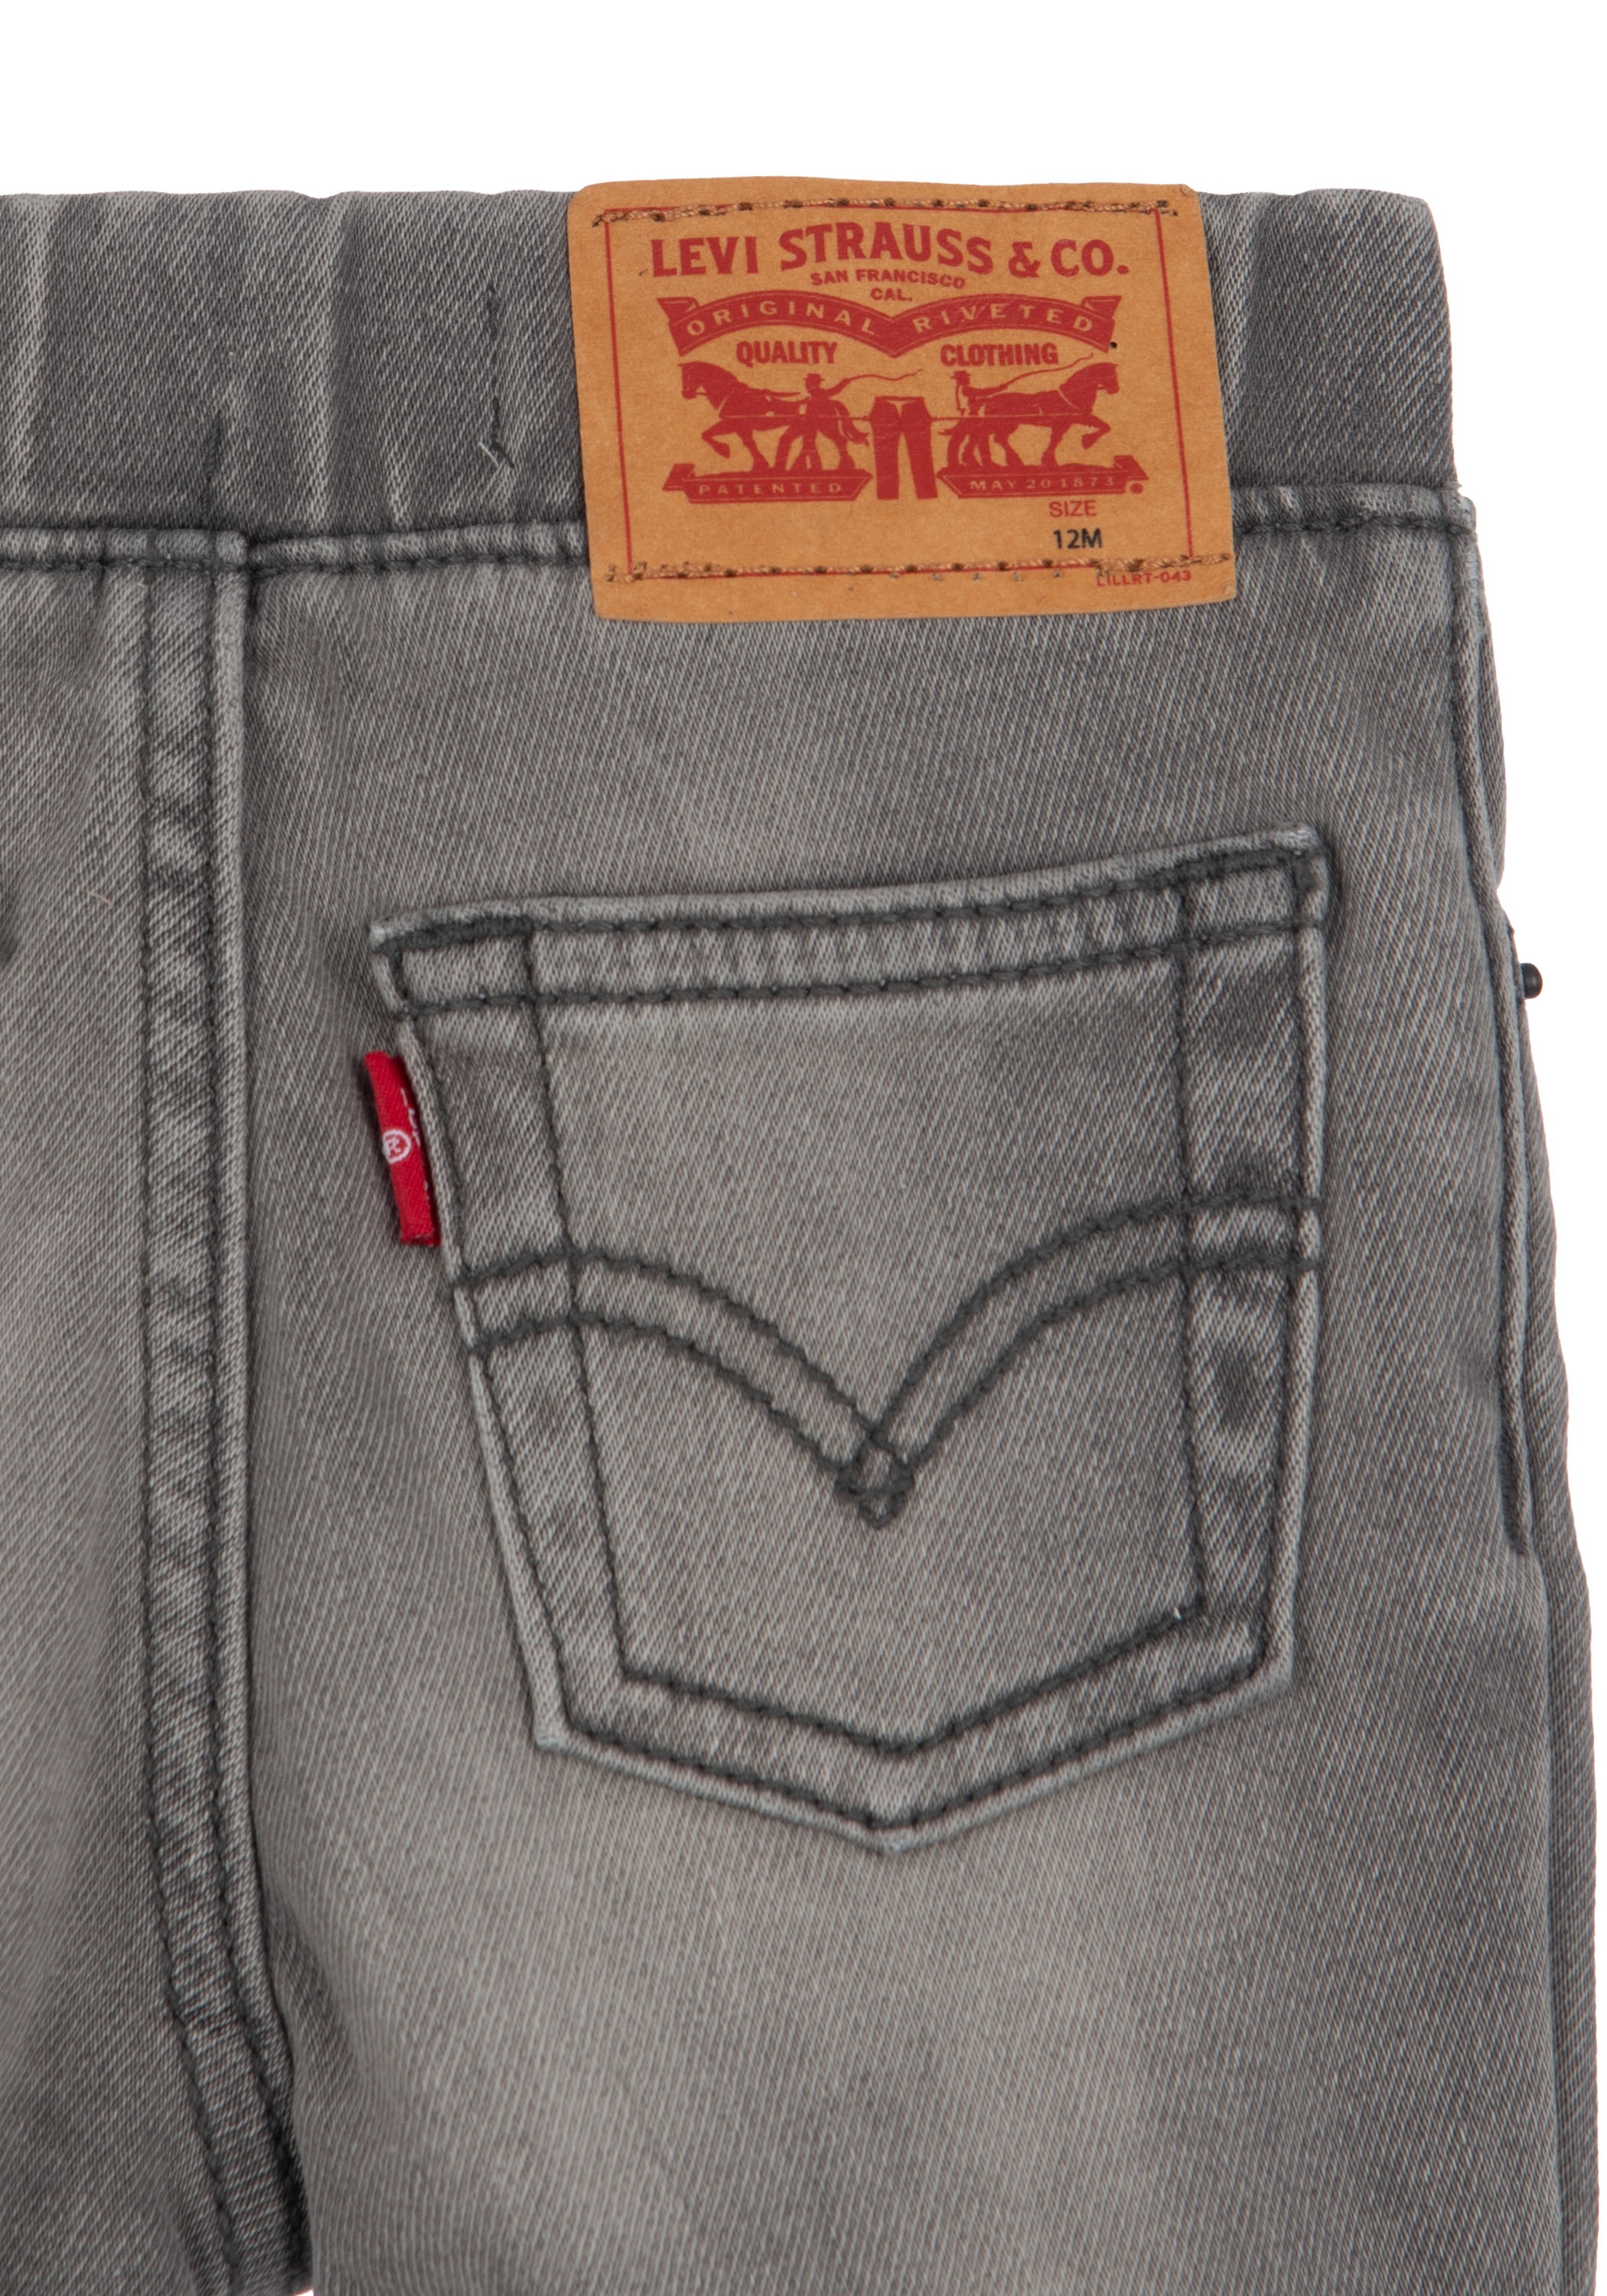 Levi's® Kids Shorts, for Baby BOYS